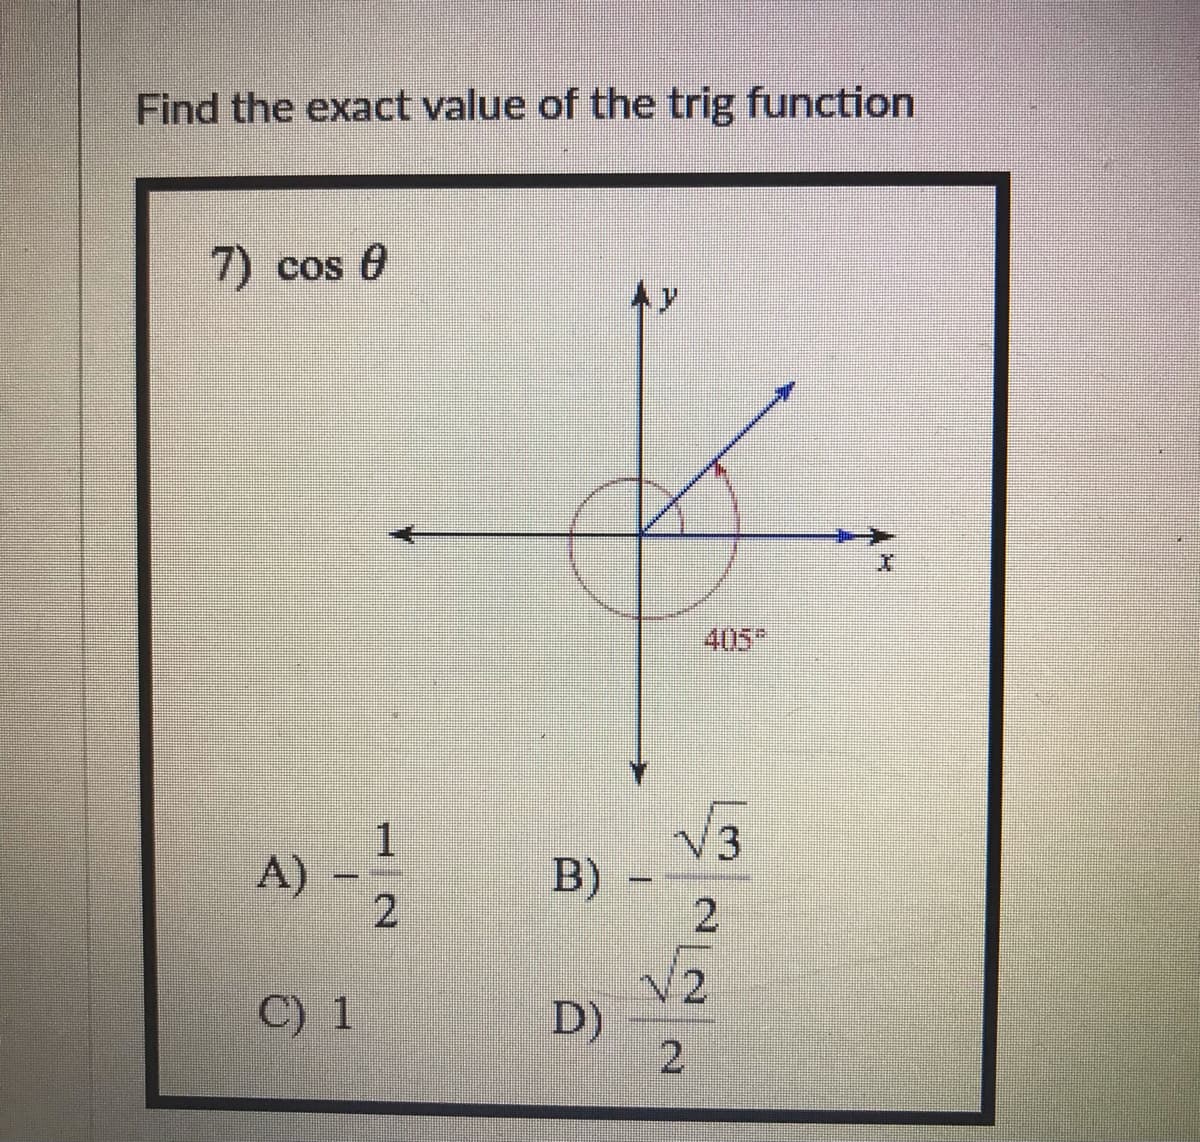 Find the exact value of the trig function
7) cos 0
405
1
A) -
2.
V3
B)
C) 1
D)
2.
